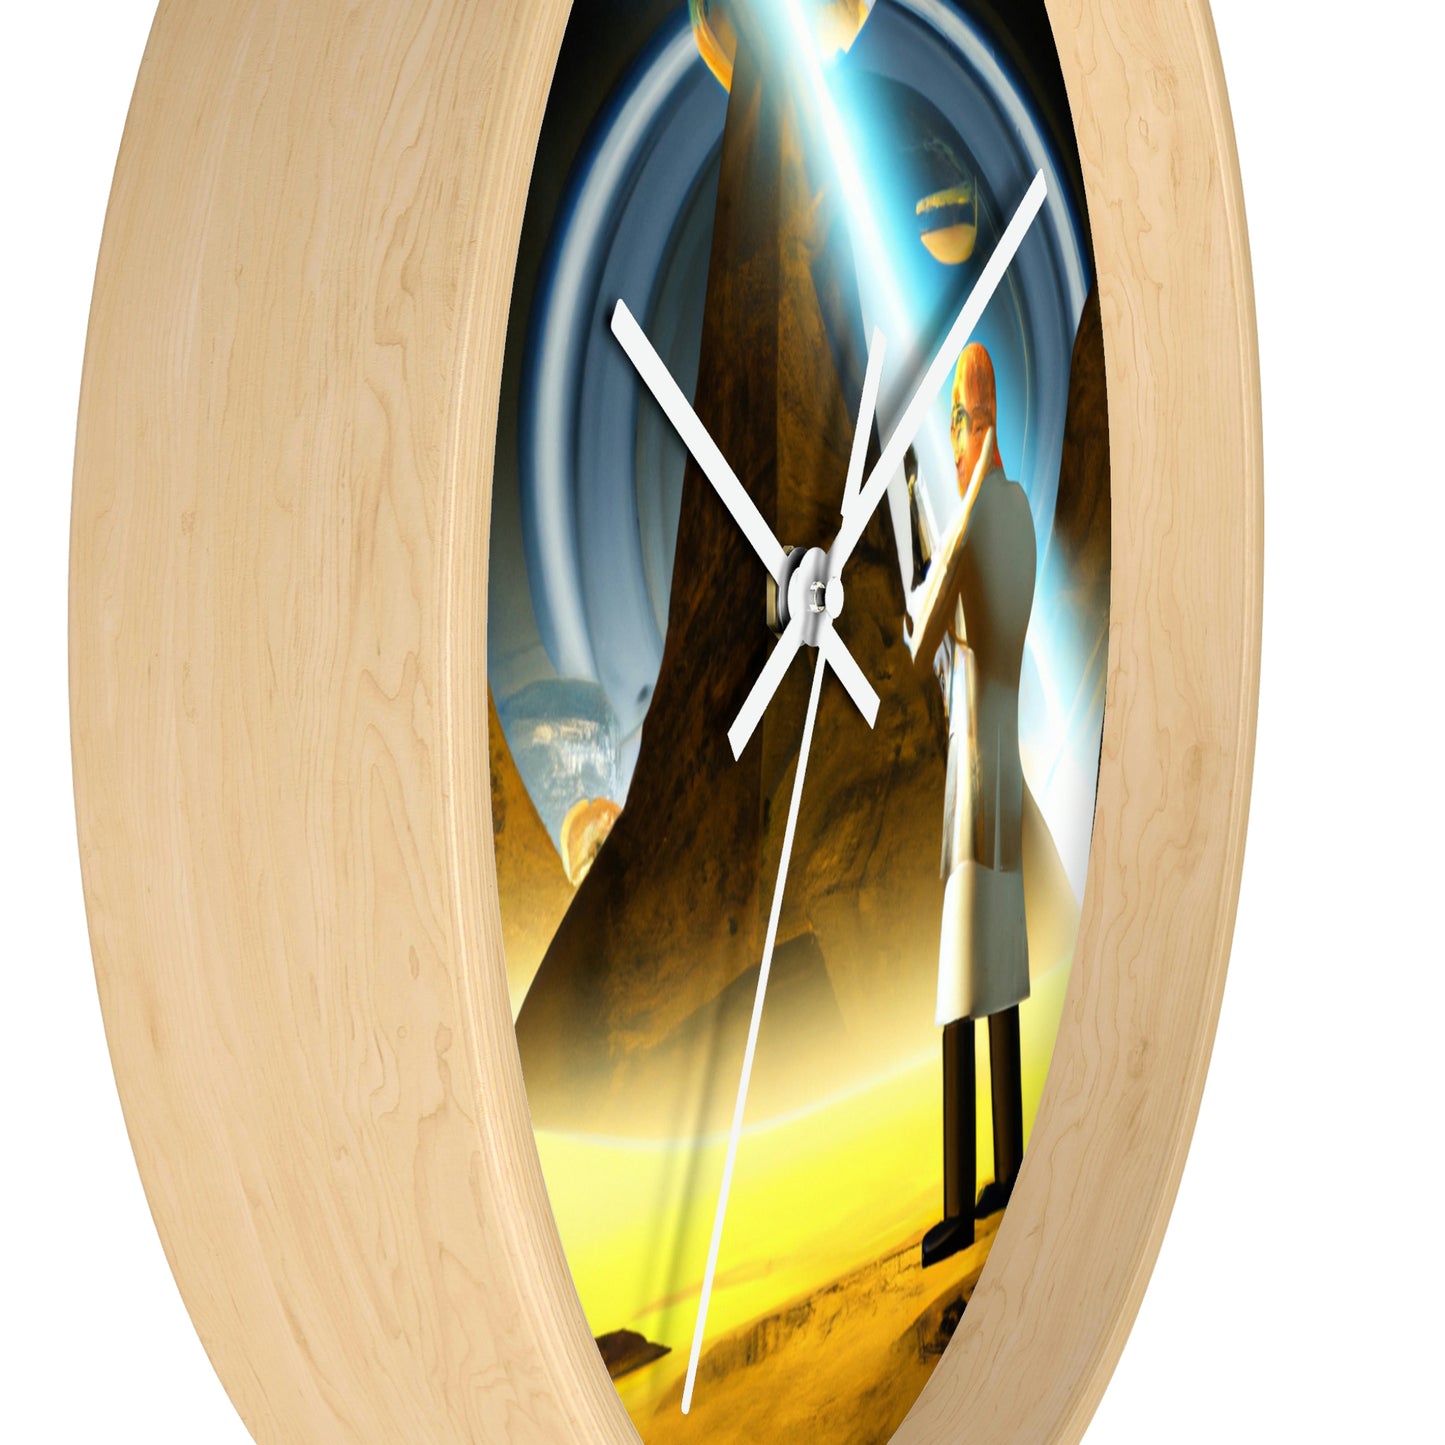 "The Rediscovery of the Lost Kingdom" - The Alien Wall Clock